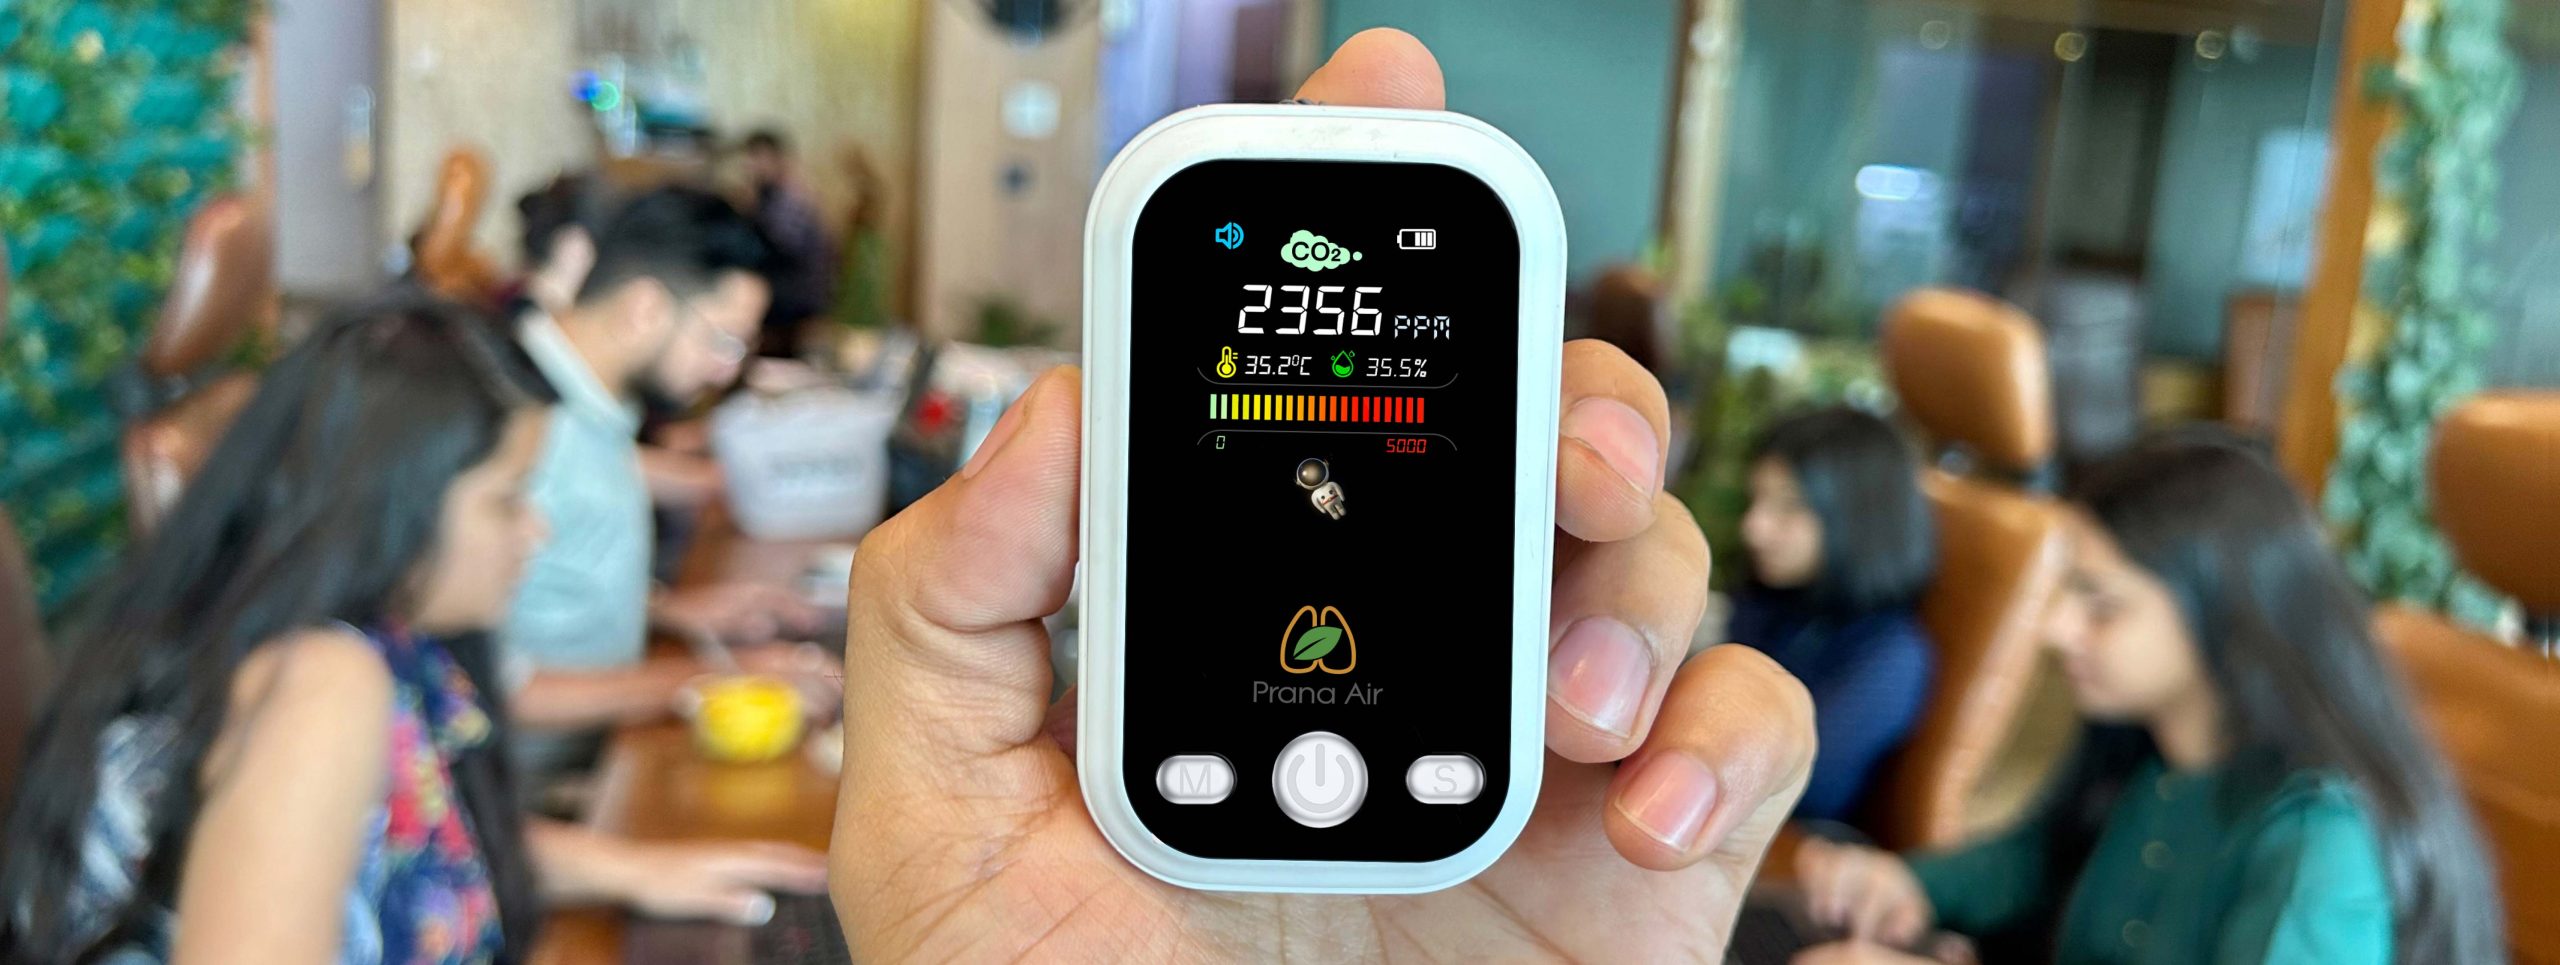 measuring co2 level in office with prana air device